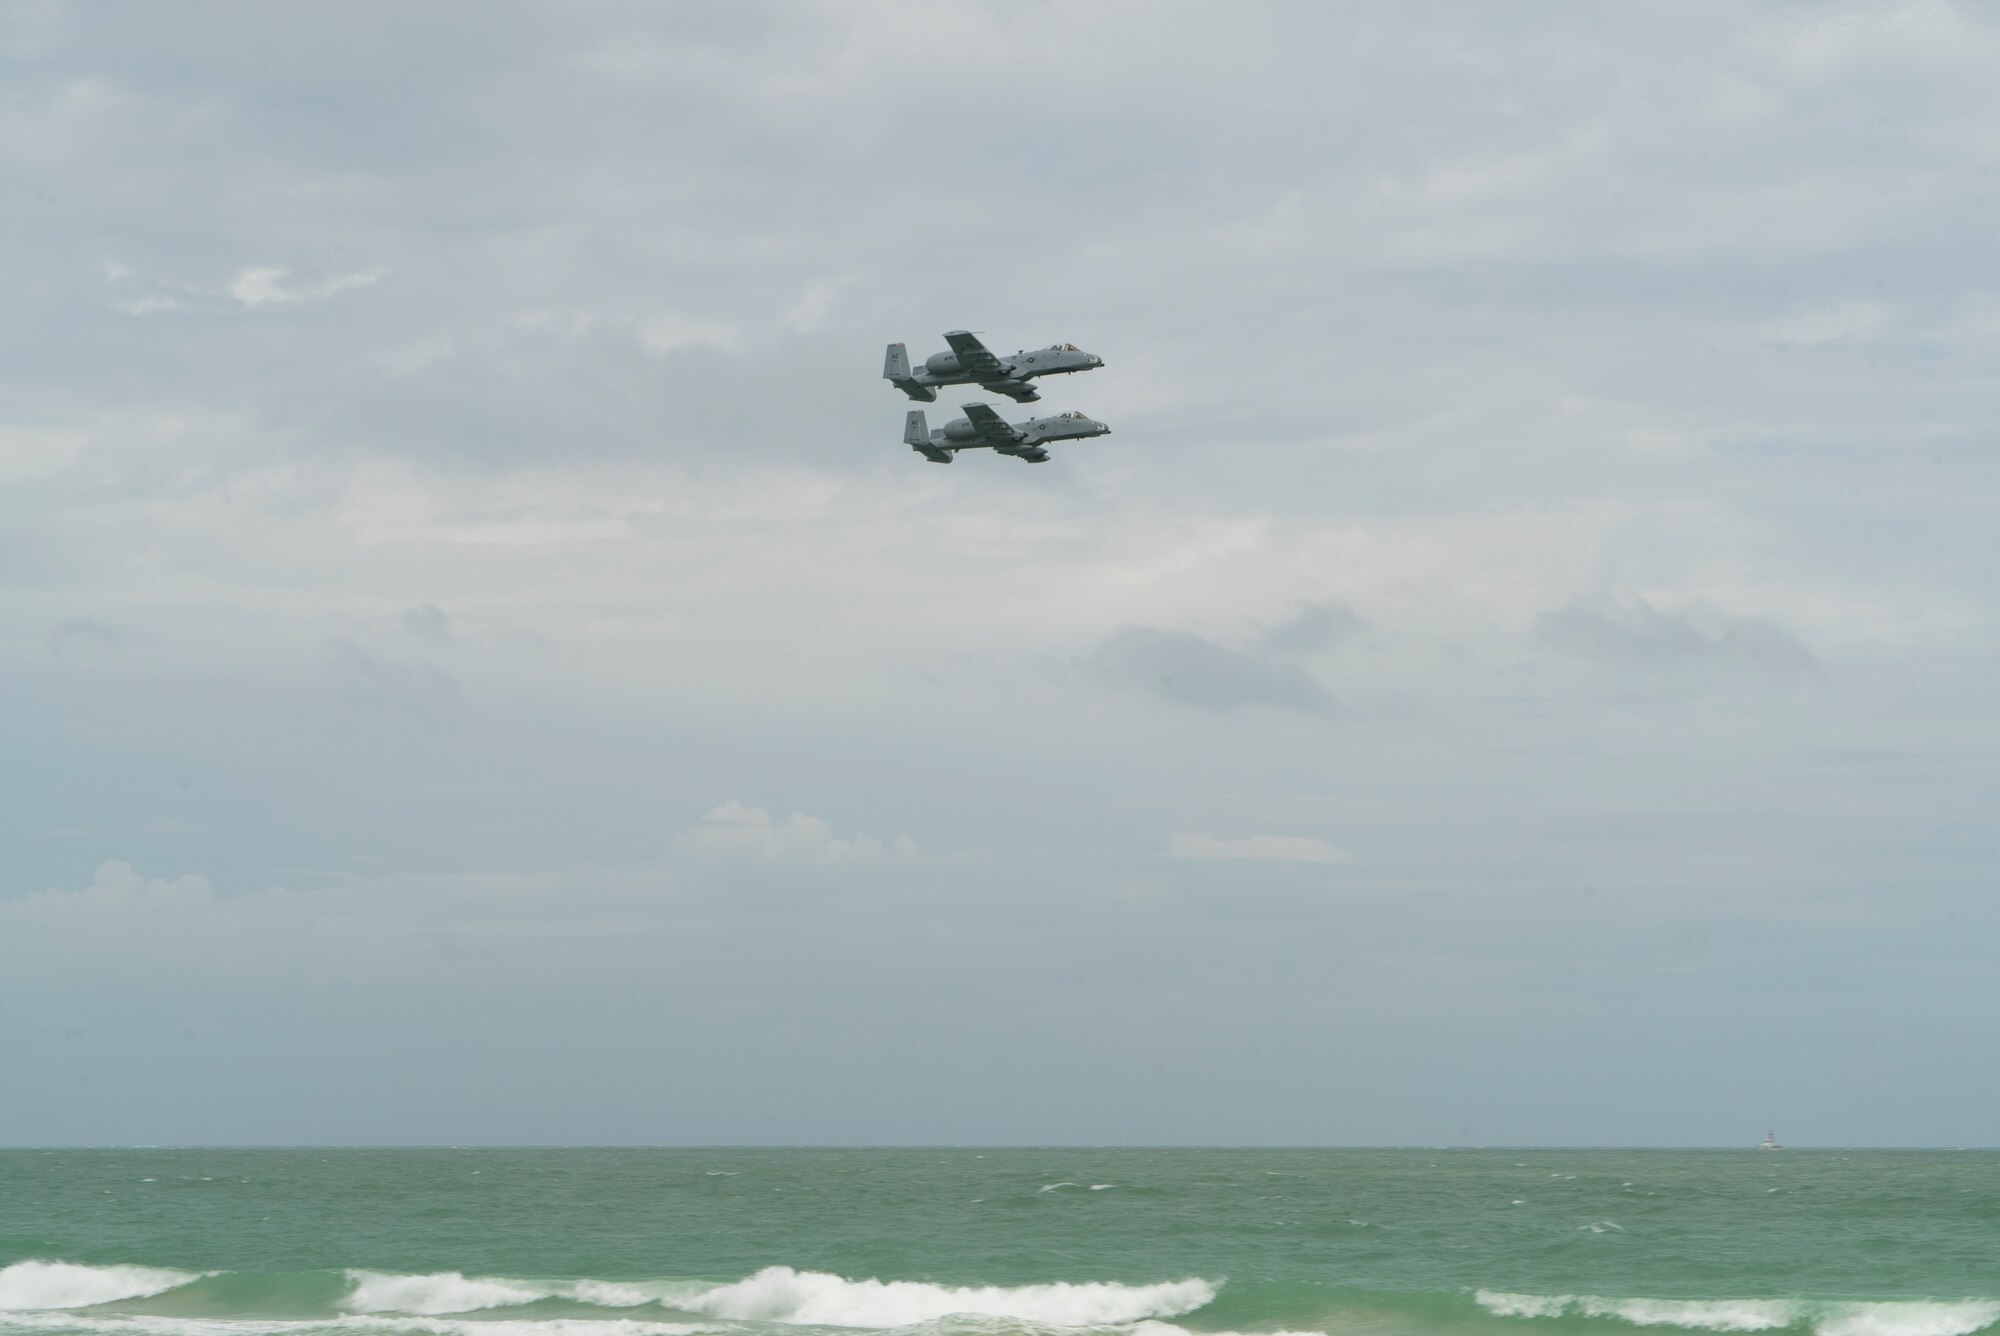 Two A-10 Thunderbolt IIs from the 442nd Fighter Wing fly in formation as part of a combat search and rescue demonstration with the 920th Rescue Wing over Miami Beach, Florida on May 26th, 2018 during the 2nd annual Salute to American Heroes Air and Sea Show. This two-day event showcases military fighter jets and other aircraft and equipment from all branches of the United States military in observance of Memorial Day. (U.S. Air Force Reserve video by Staff Sergeant Nicholas A. Priest)